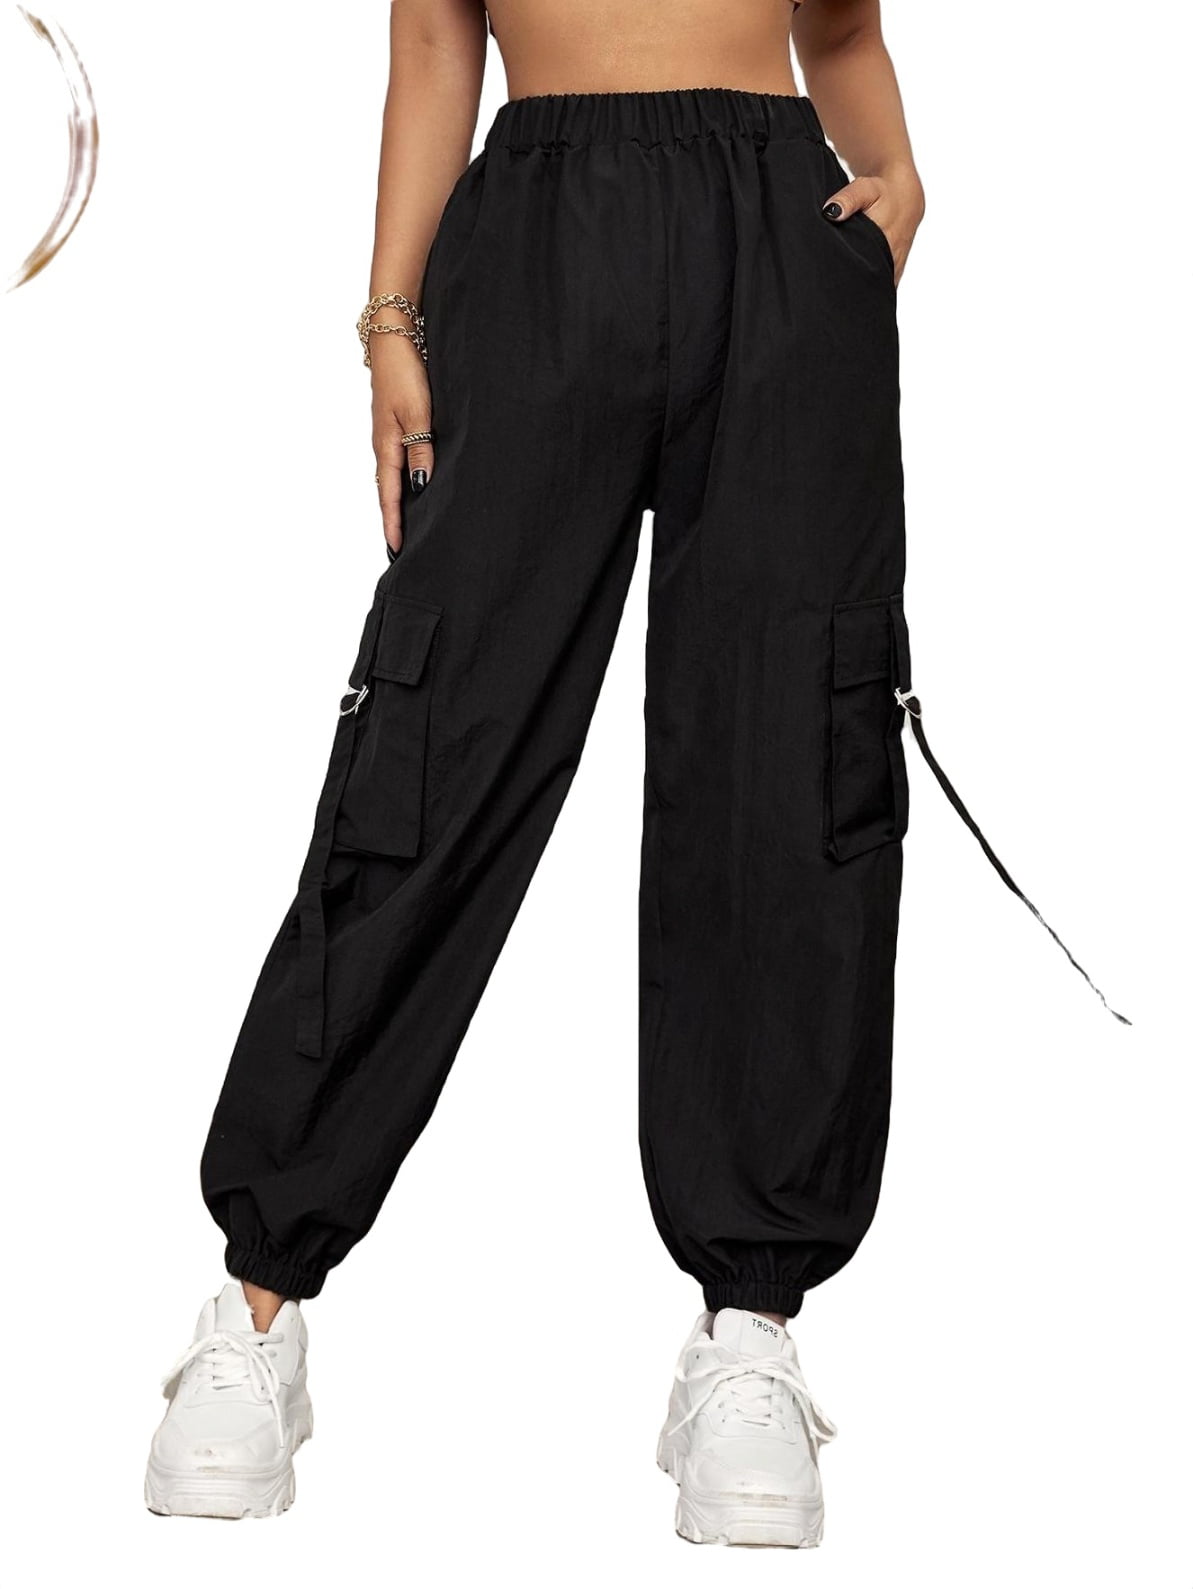 Women Ladies Casual High Waist Elastic Slim Pocket Pants Skinny Pencil Pants  Cargo Trousers With Side Pockets Long Harem Pants From 20 €